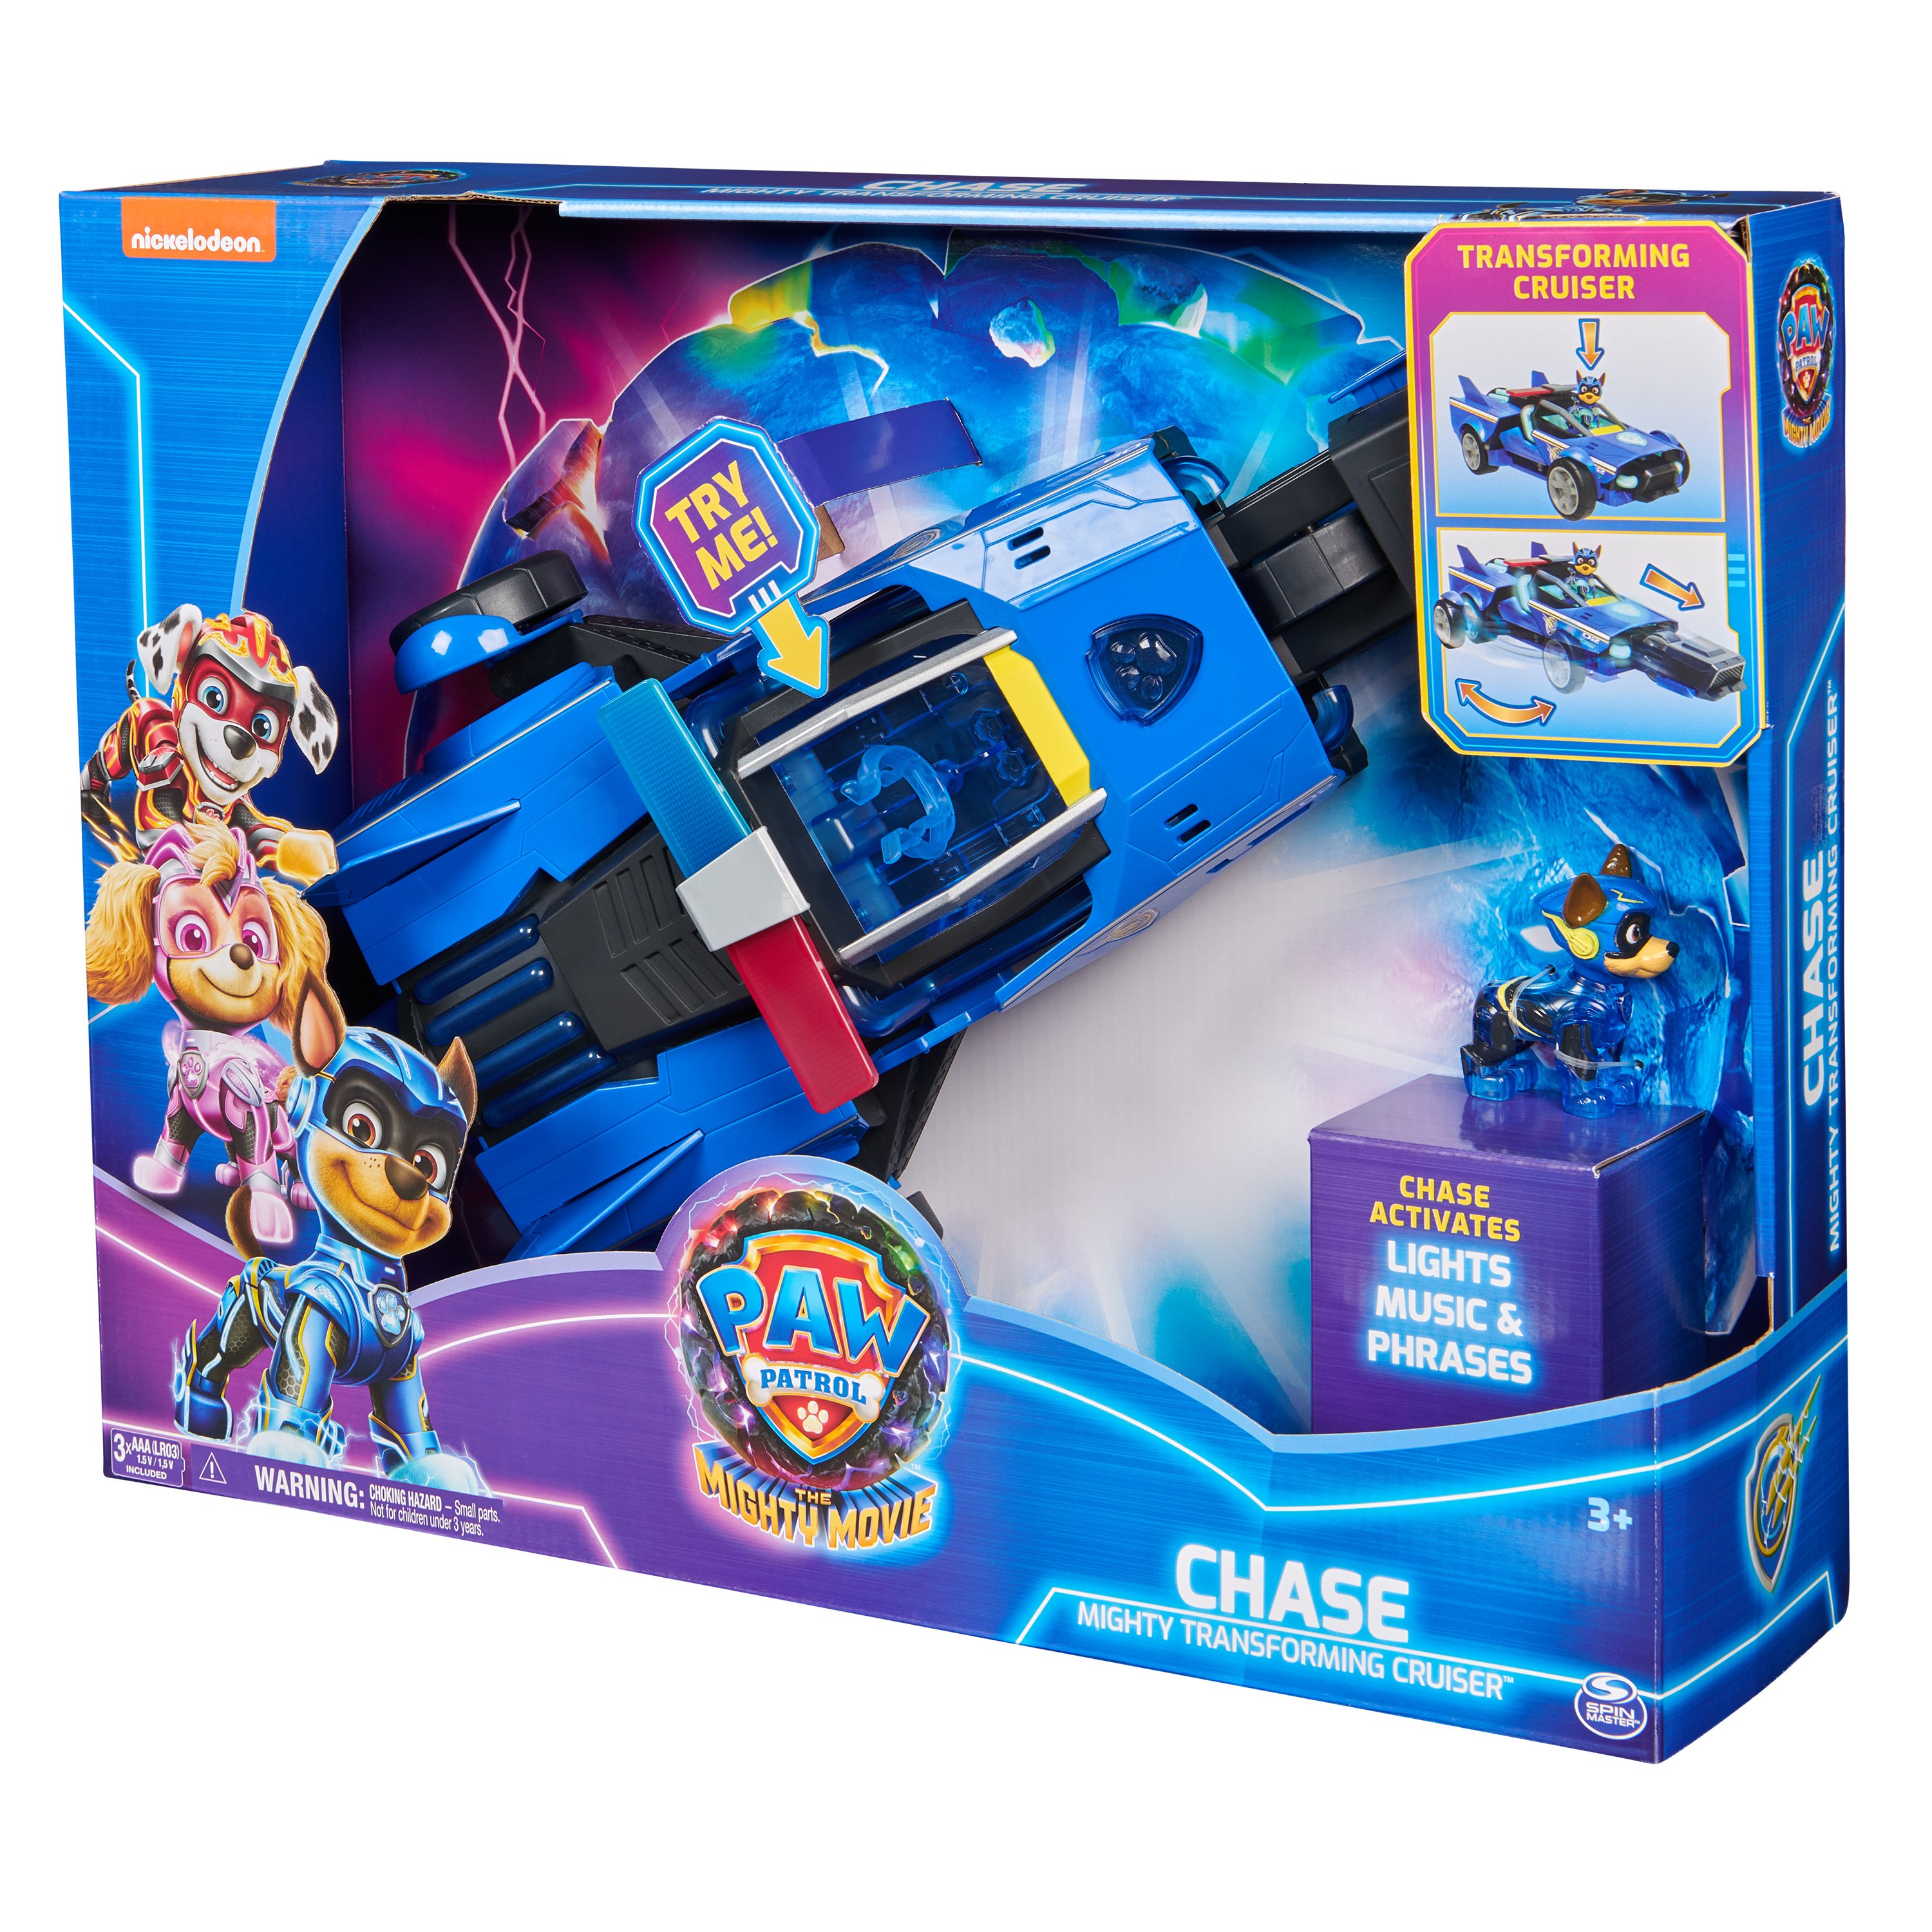 Spin Master launches 'Mighty Express'; says 'Paw Patrol' 'isn't